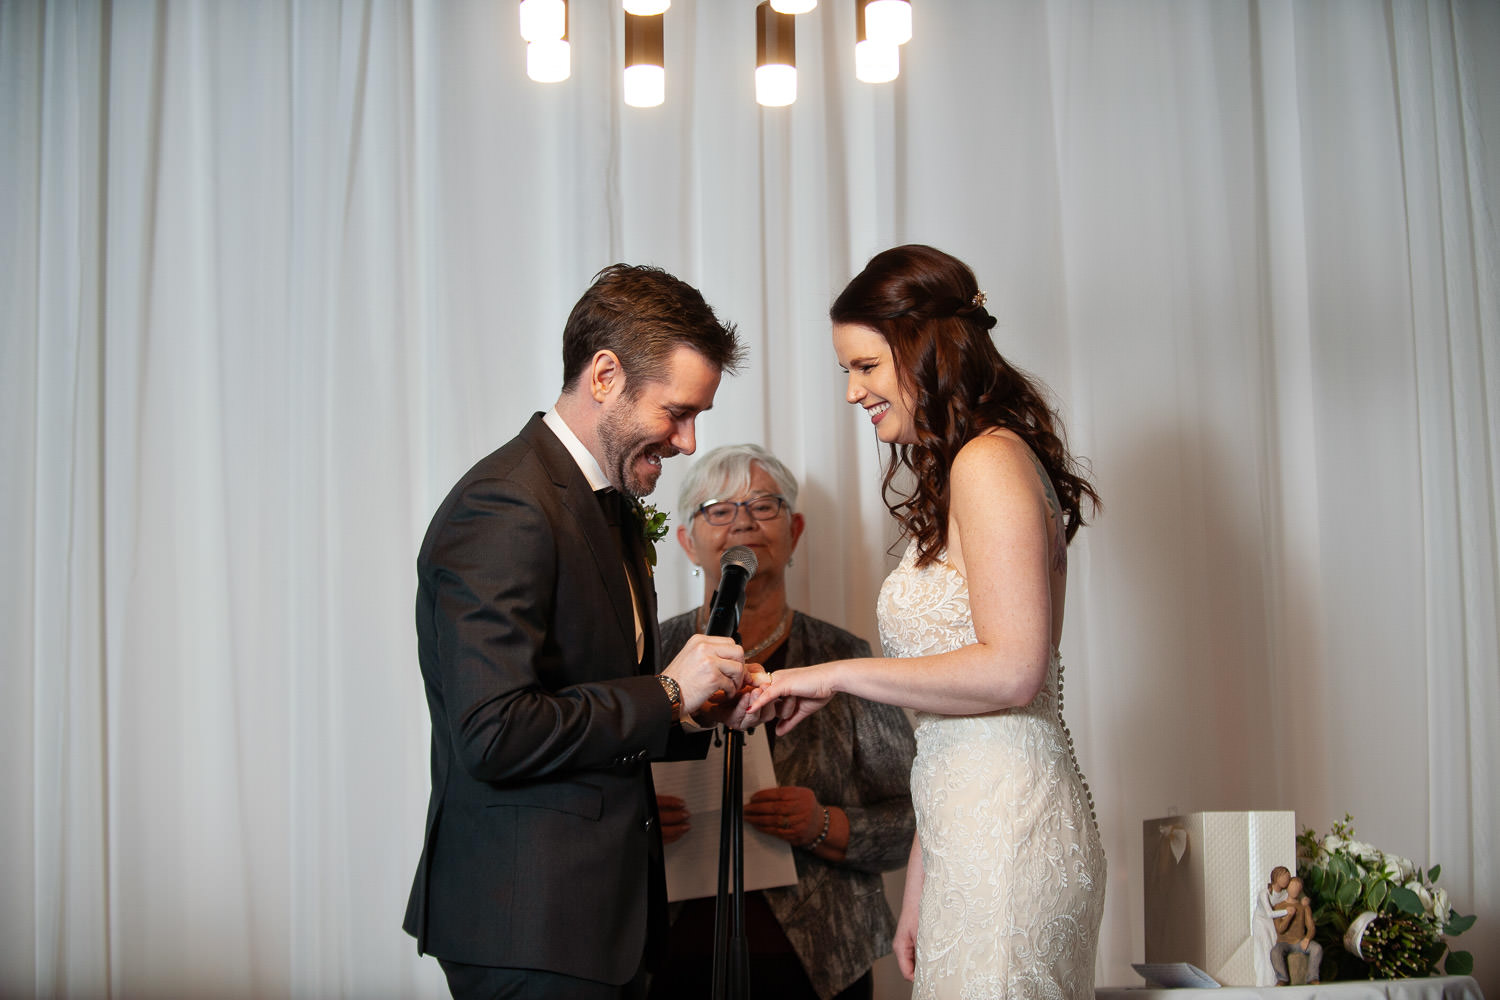 Wedding ceremony at Alforno in Eau Claire captured by Tara Whittaker Photography